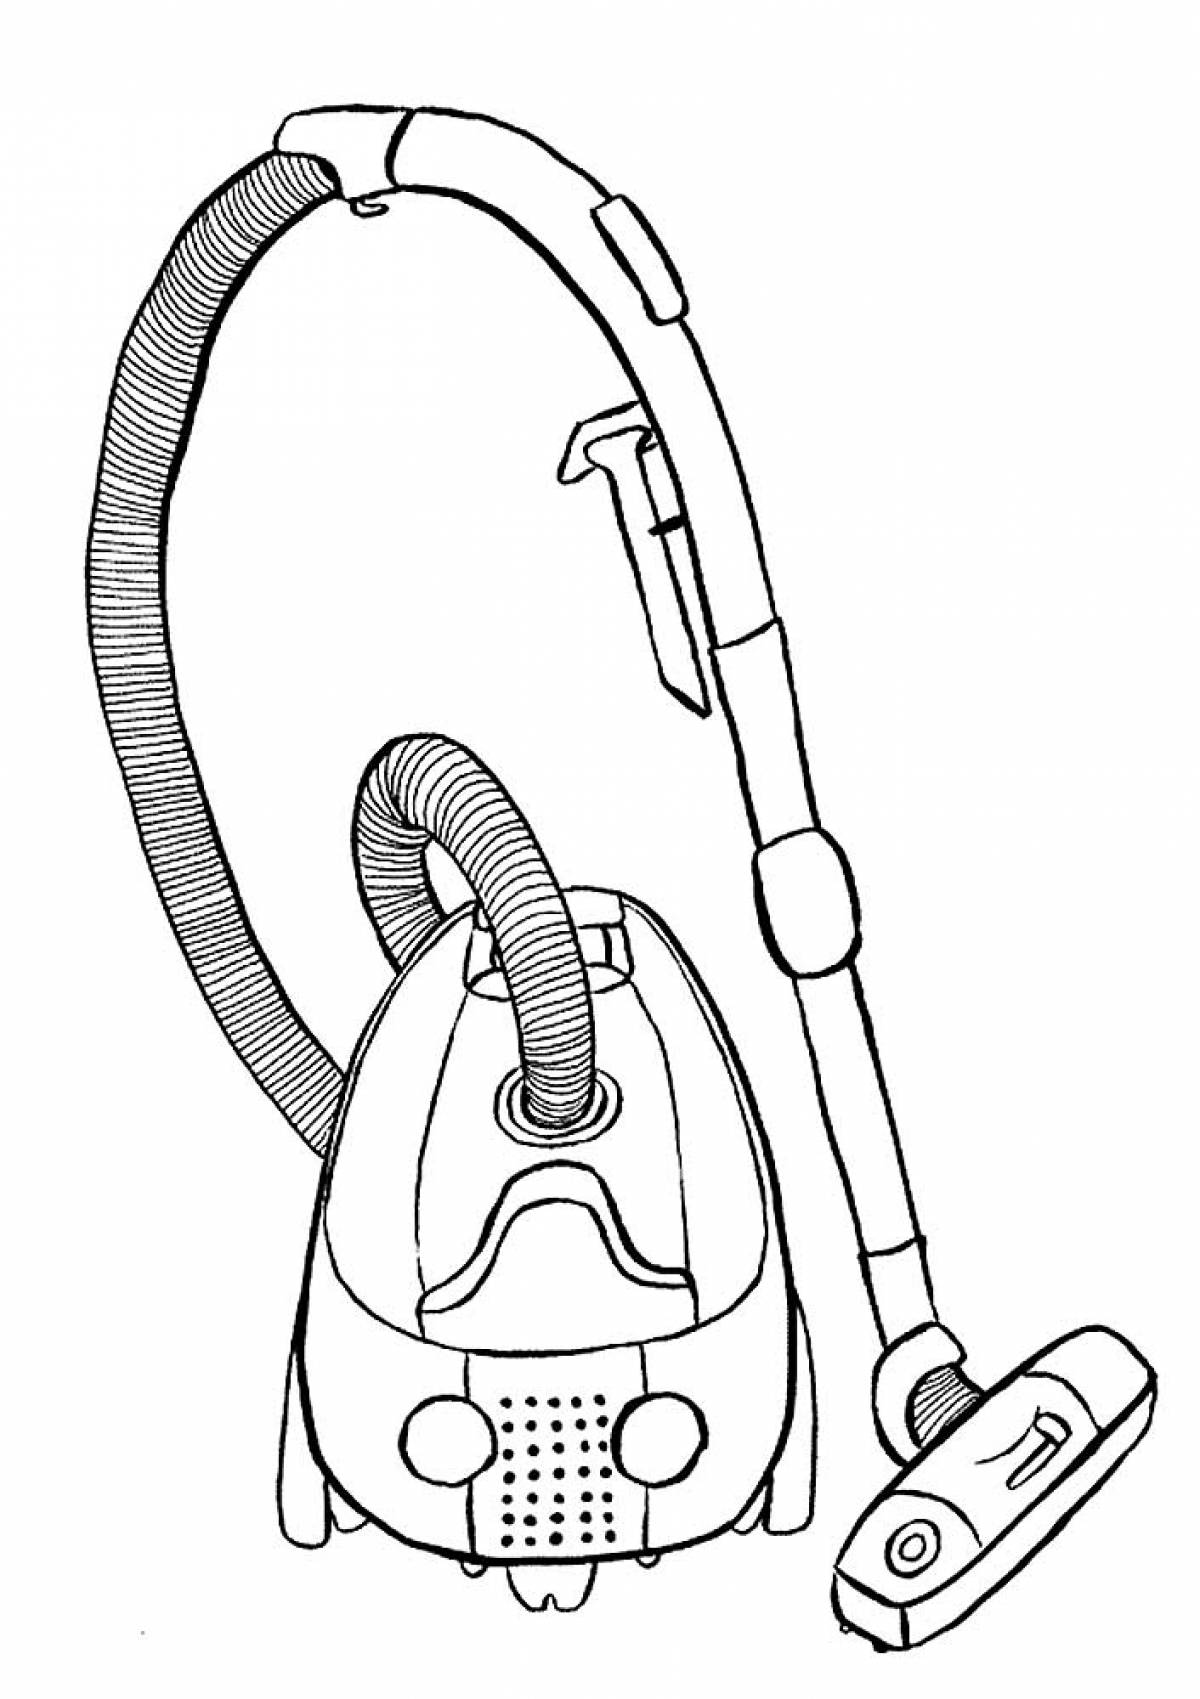 Vacuum cleaner coloring page